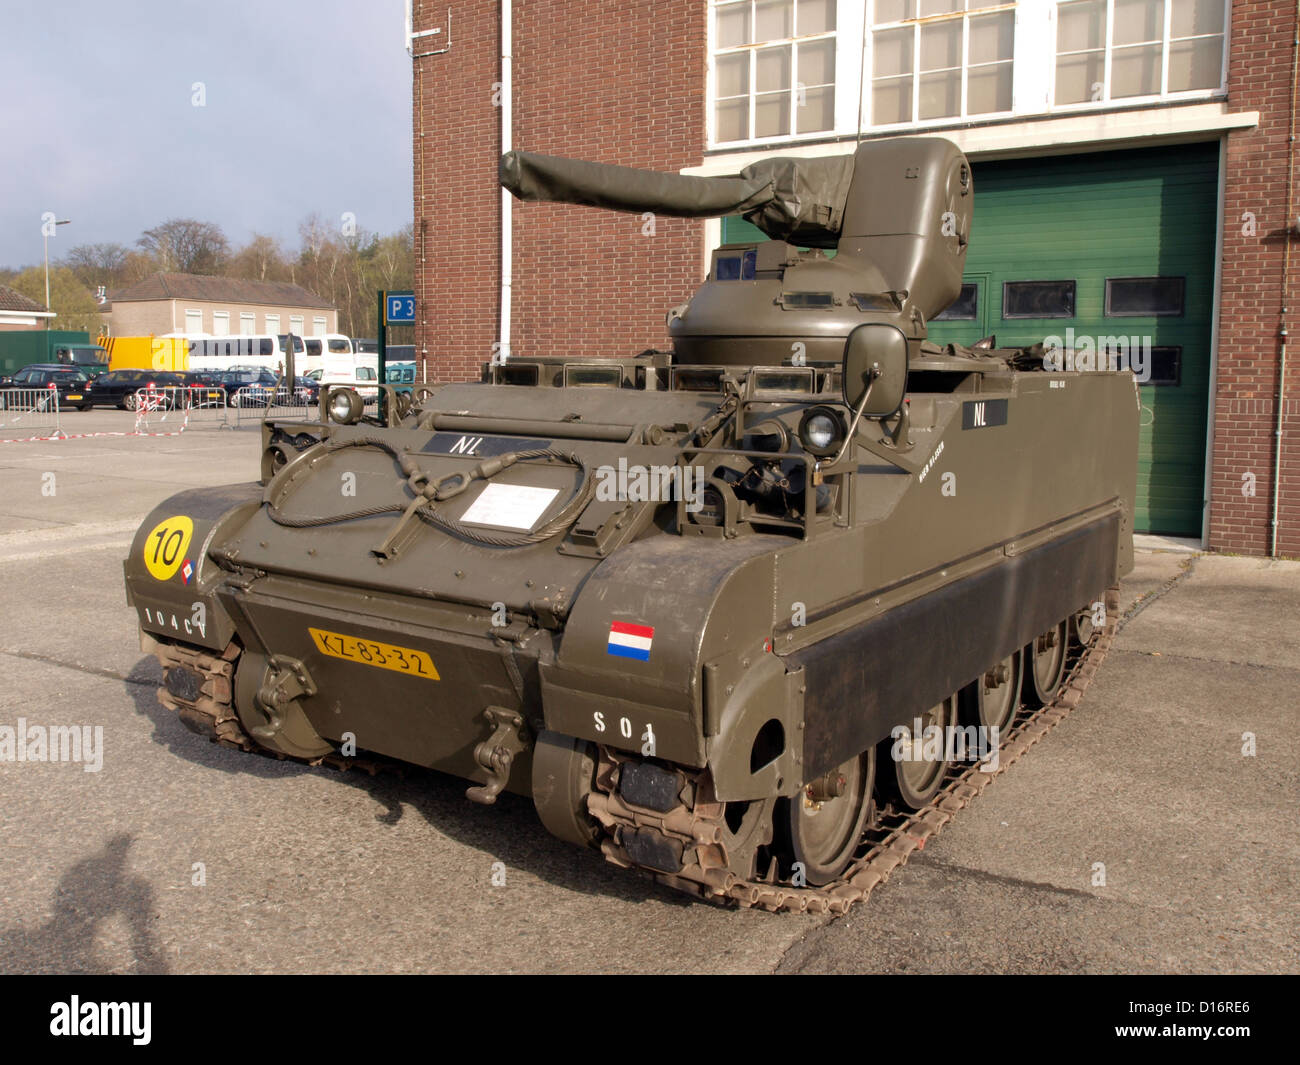 YPR-765, S01 of the 104CV Stock Photo